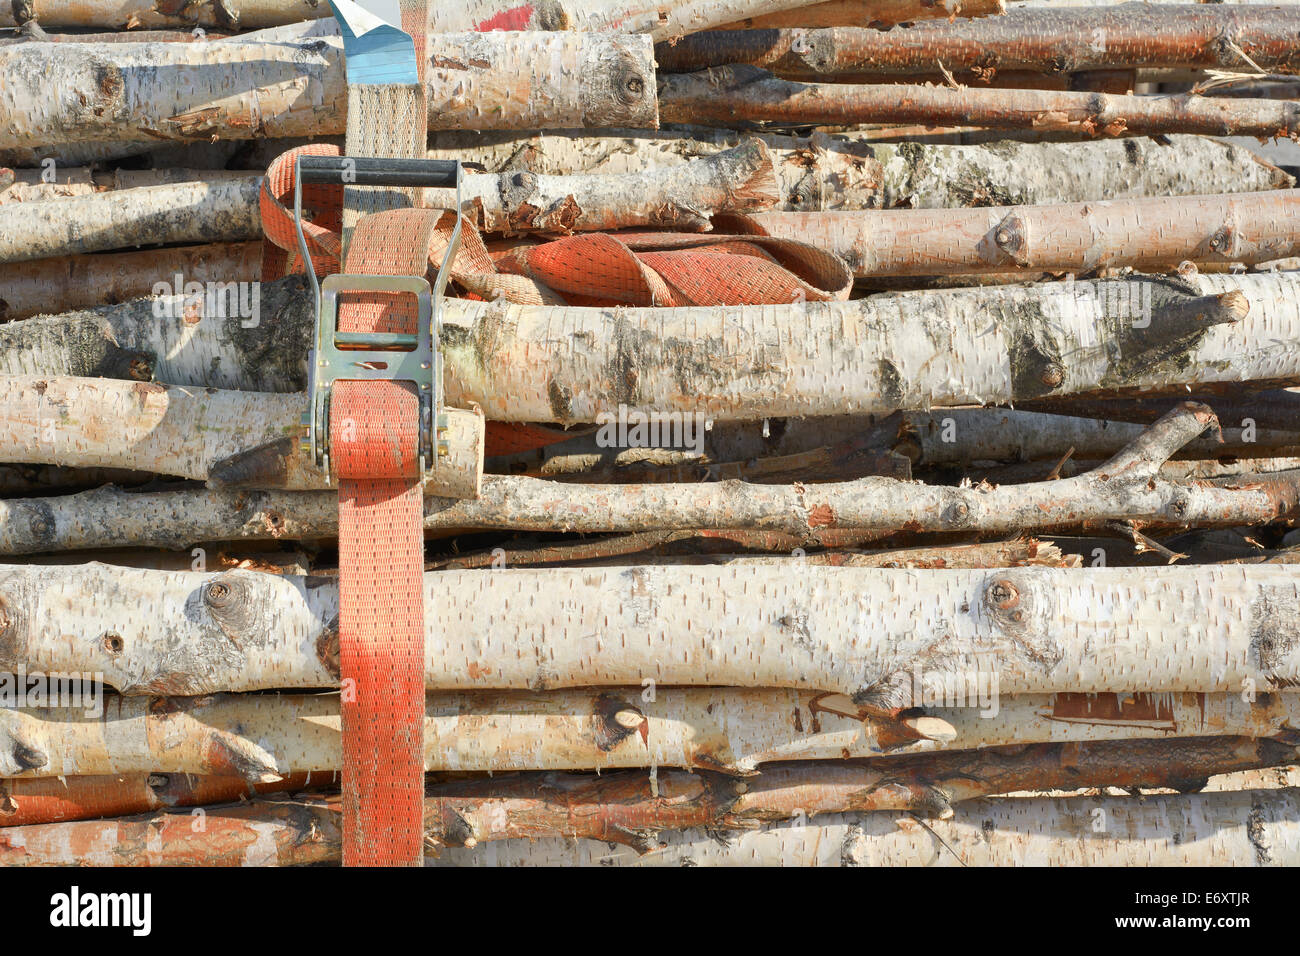 Cut Wood as Renewable Resource of Energy with Industrial Strap Stock Photo